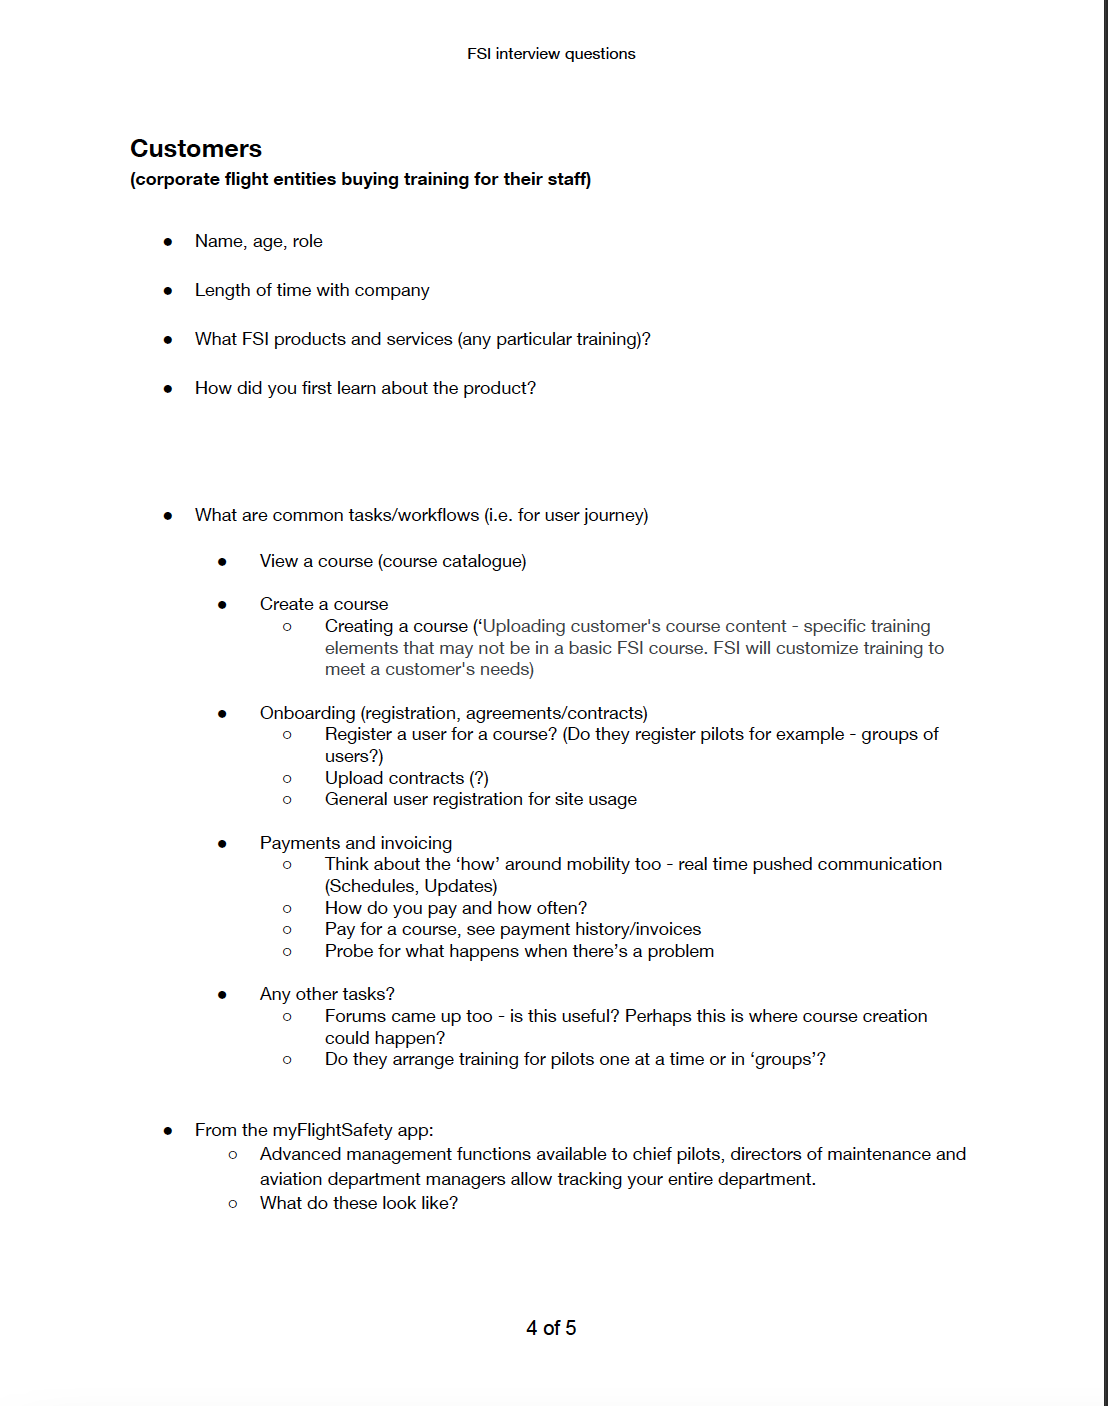 Example of user interview questions page 4